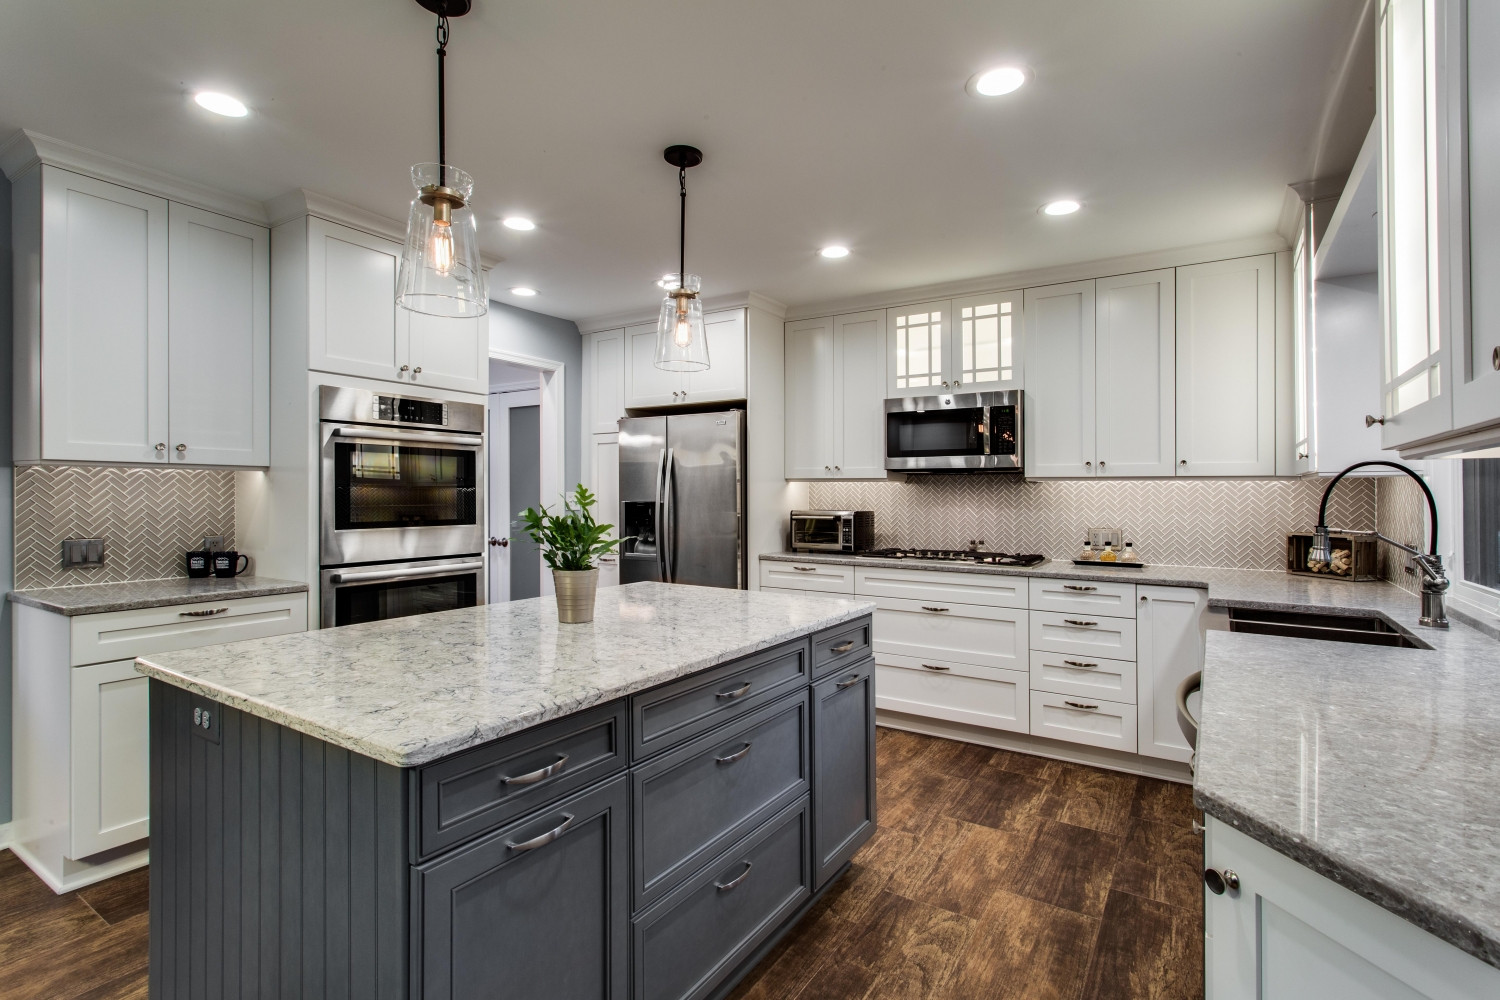 Kitchen Remodeling Pictures
 The Best Kitchen Remodel For Your Money